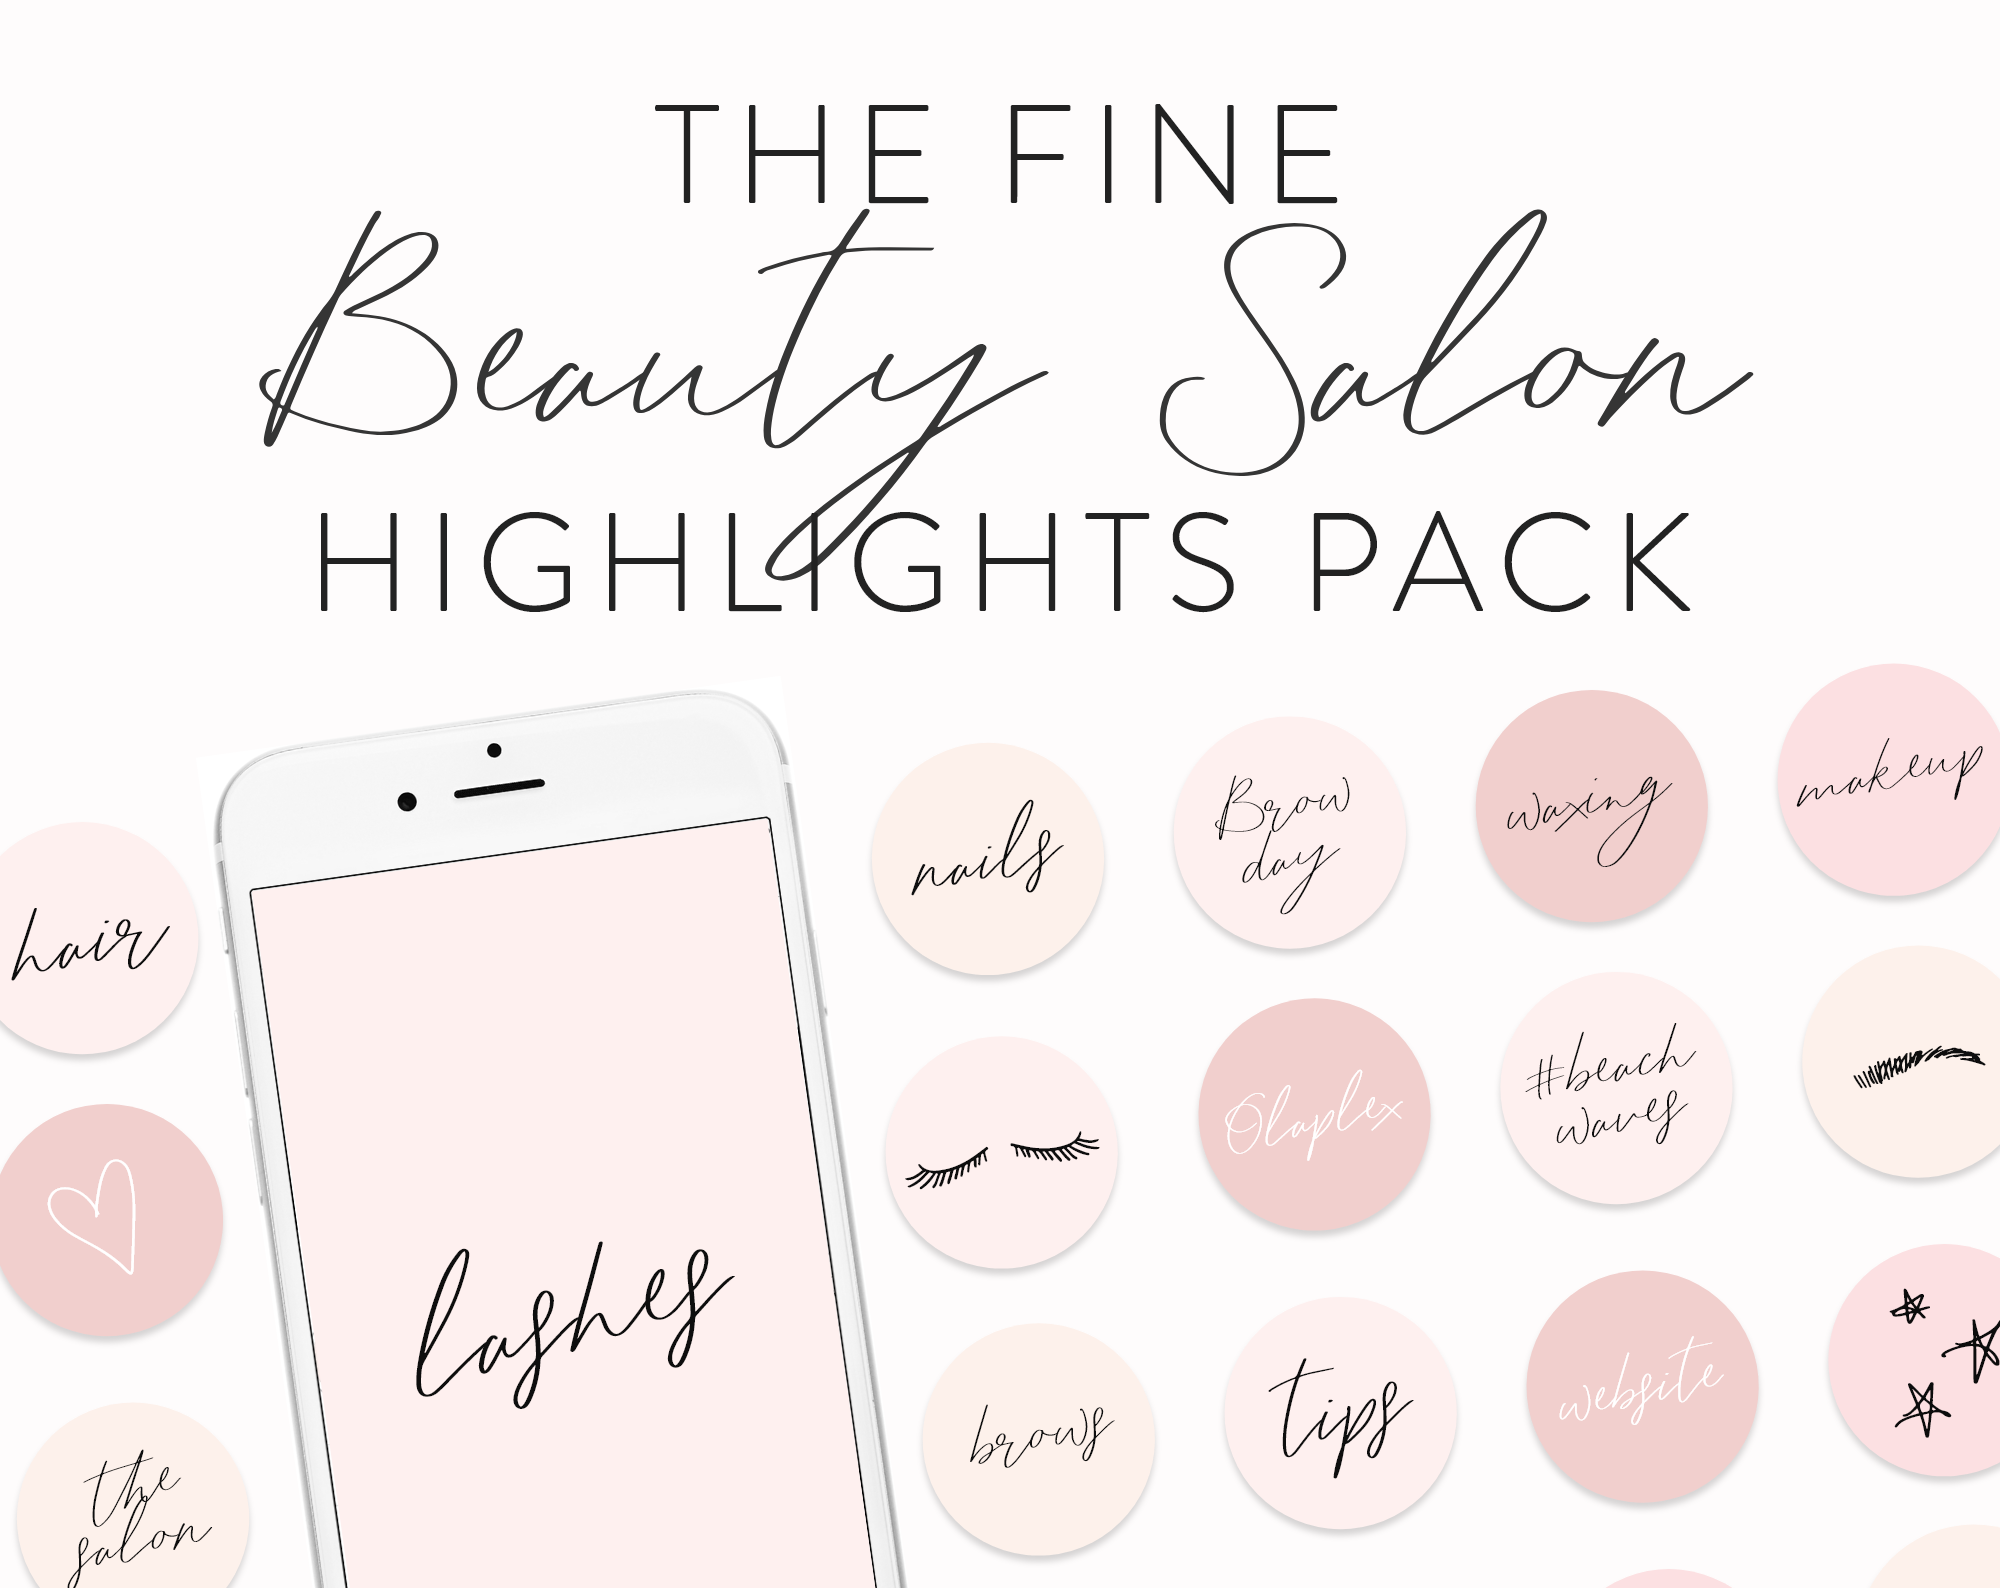 beauty-fine-highlight-Icons-pack